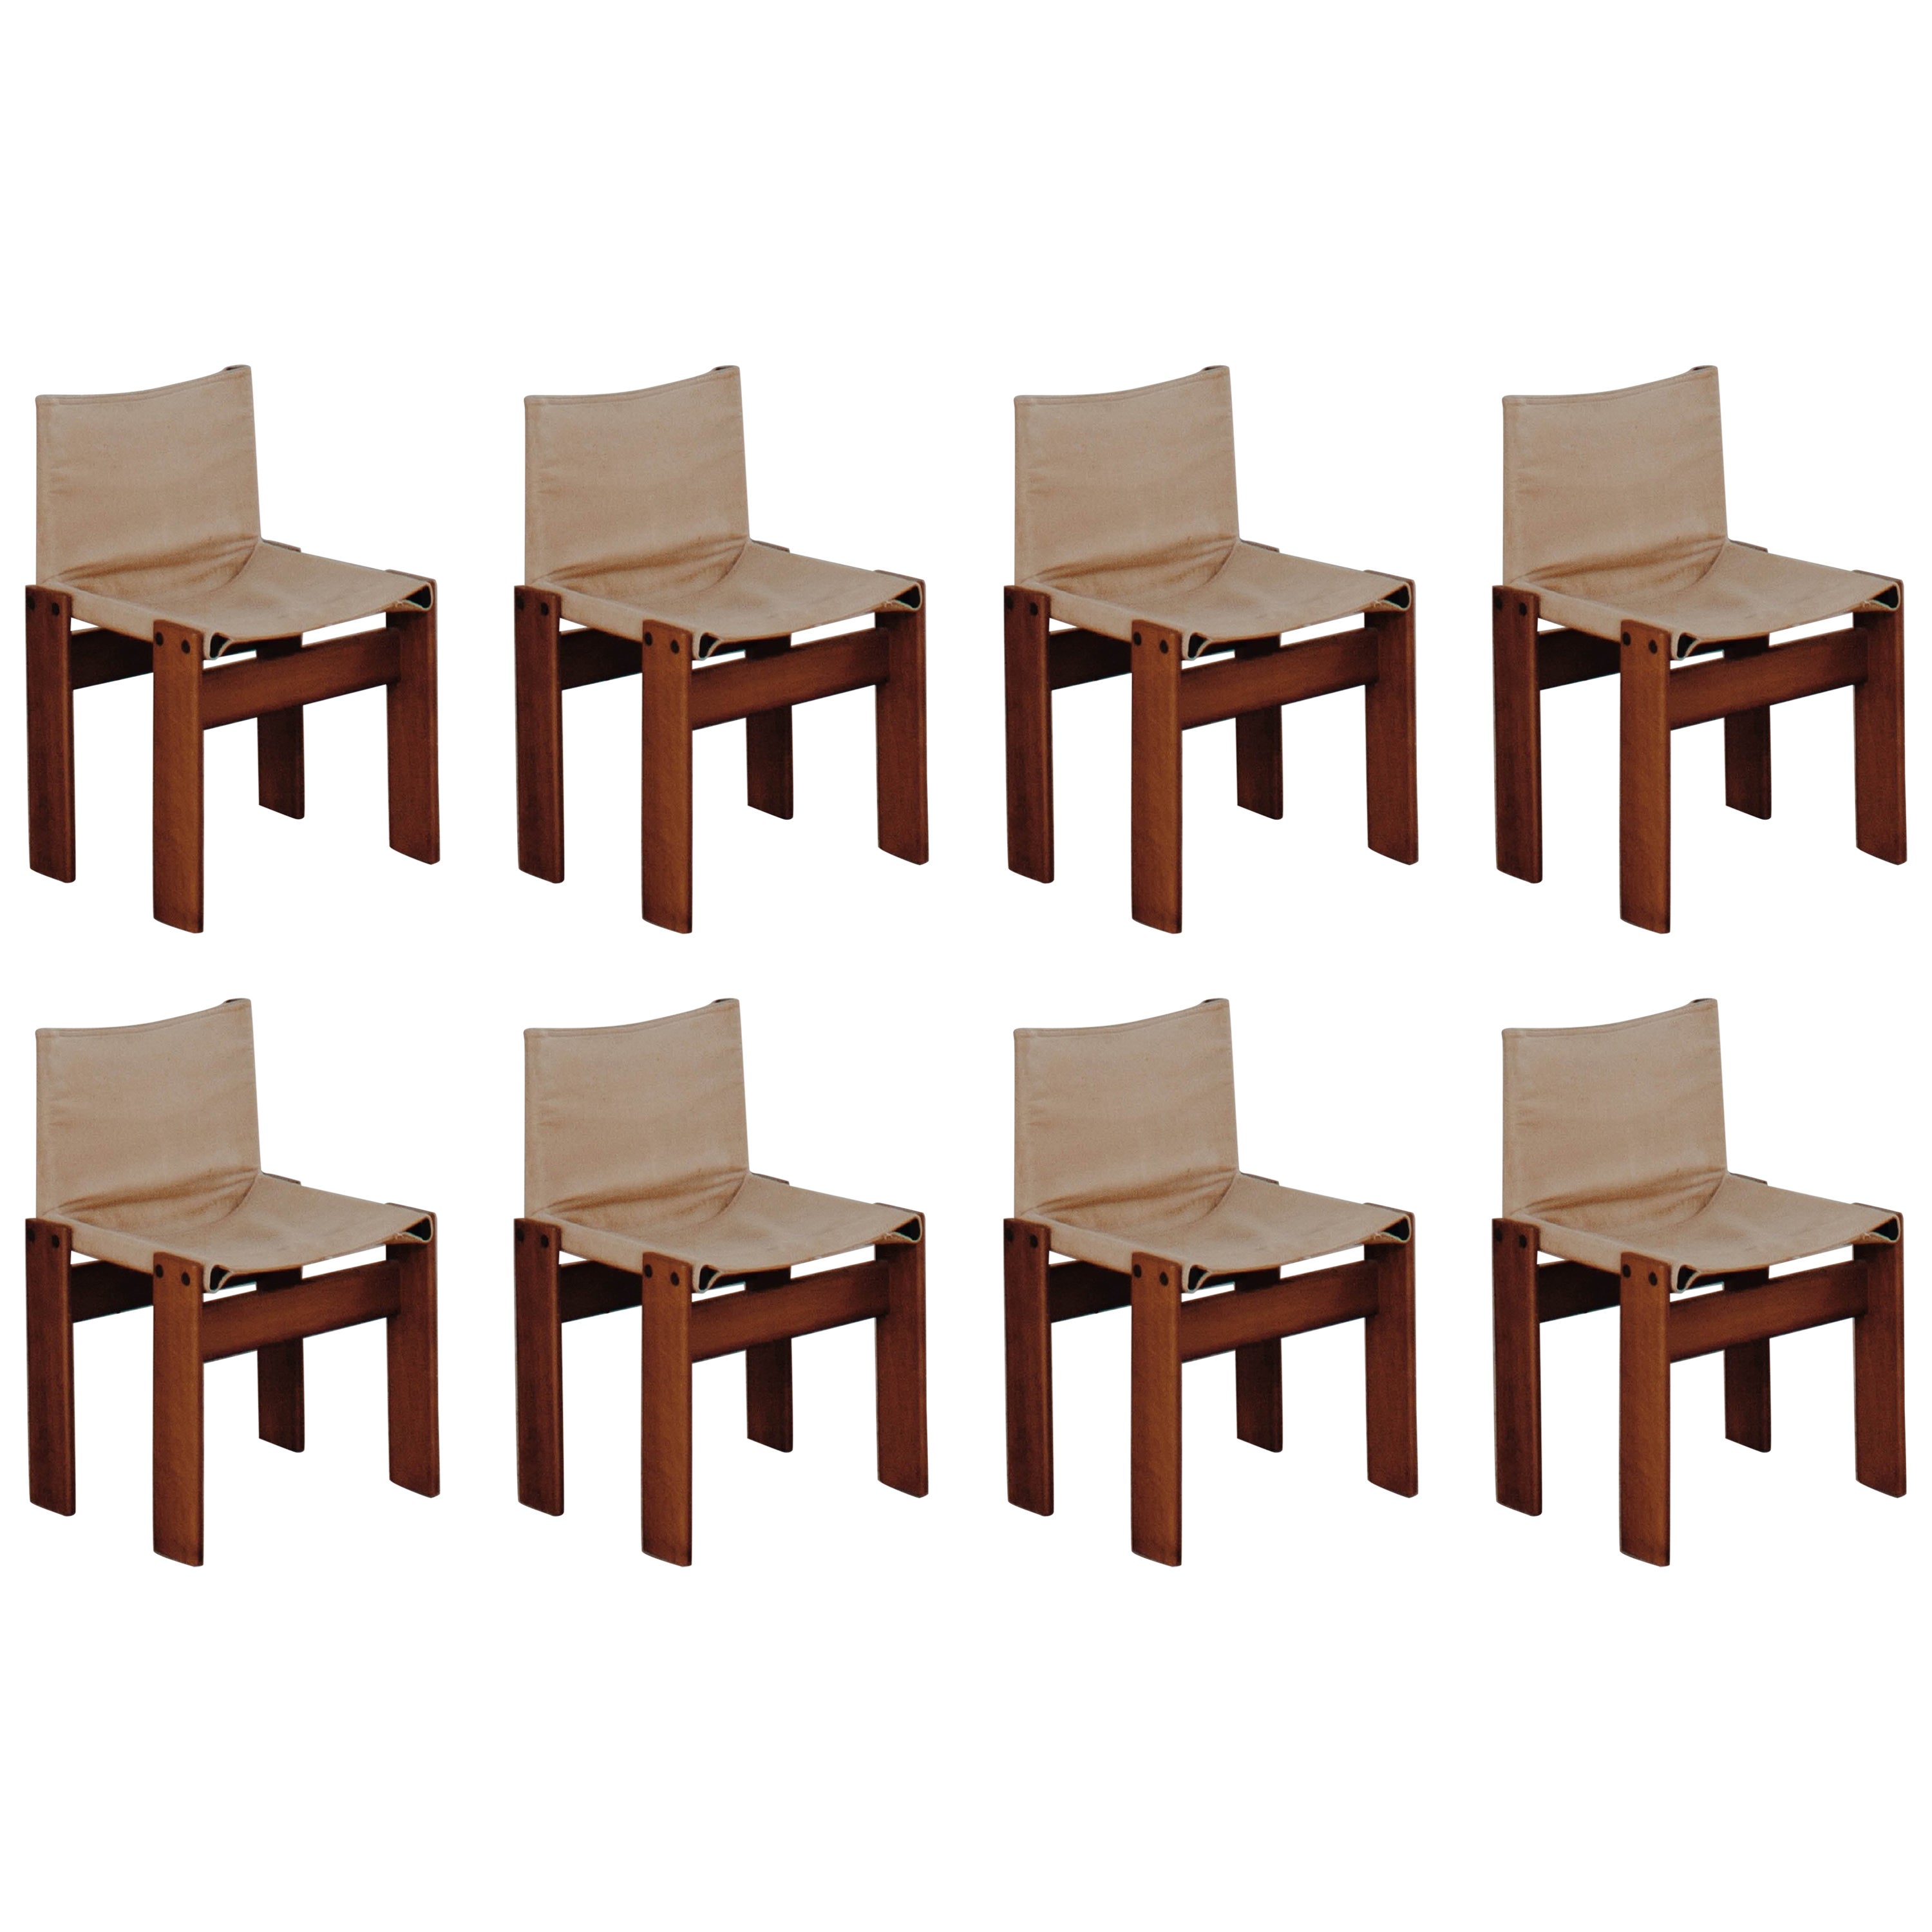 Afra & Tobia Scarpa "Monk" Chairs for Molteni, 1974, Set of 8